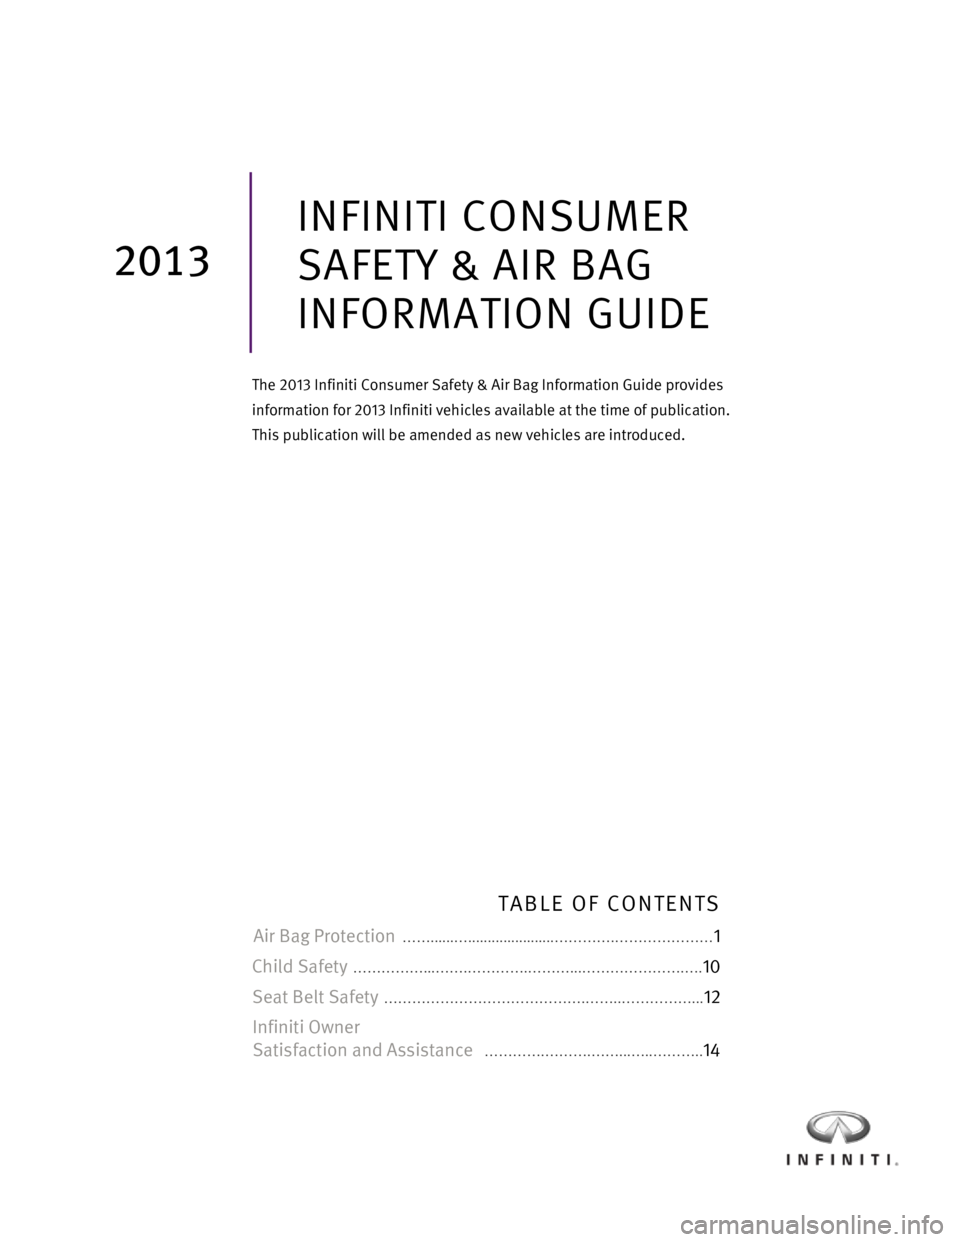 INFINITI EX 2013  Consumer Safety And Air Bag Information Guide 2013 Infiniti Consumer Safety & Air Bag Information Guide                                         0 
 
 
 
 
 
 
 
 
 
 
 
 
 
 
 
 
 
 
 
 
 
 
 
 
 
 
 
 
 
 
 
 
INFINITI CONSUMER  
SAFETY & AIR BA